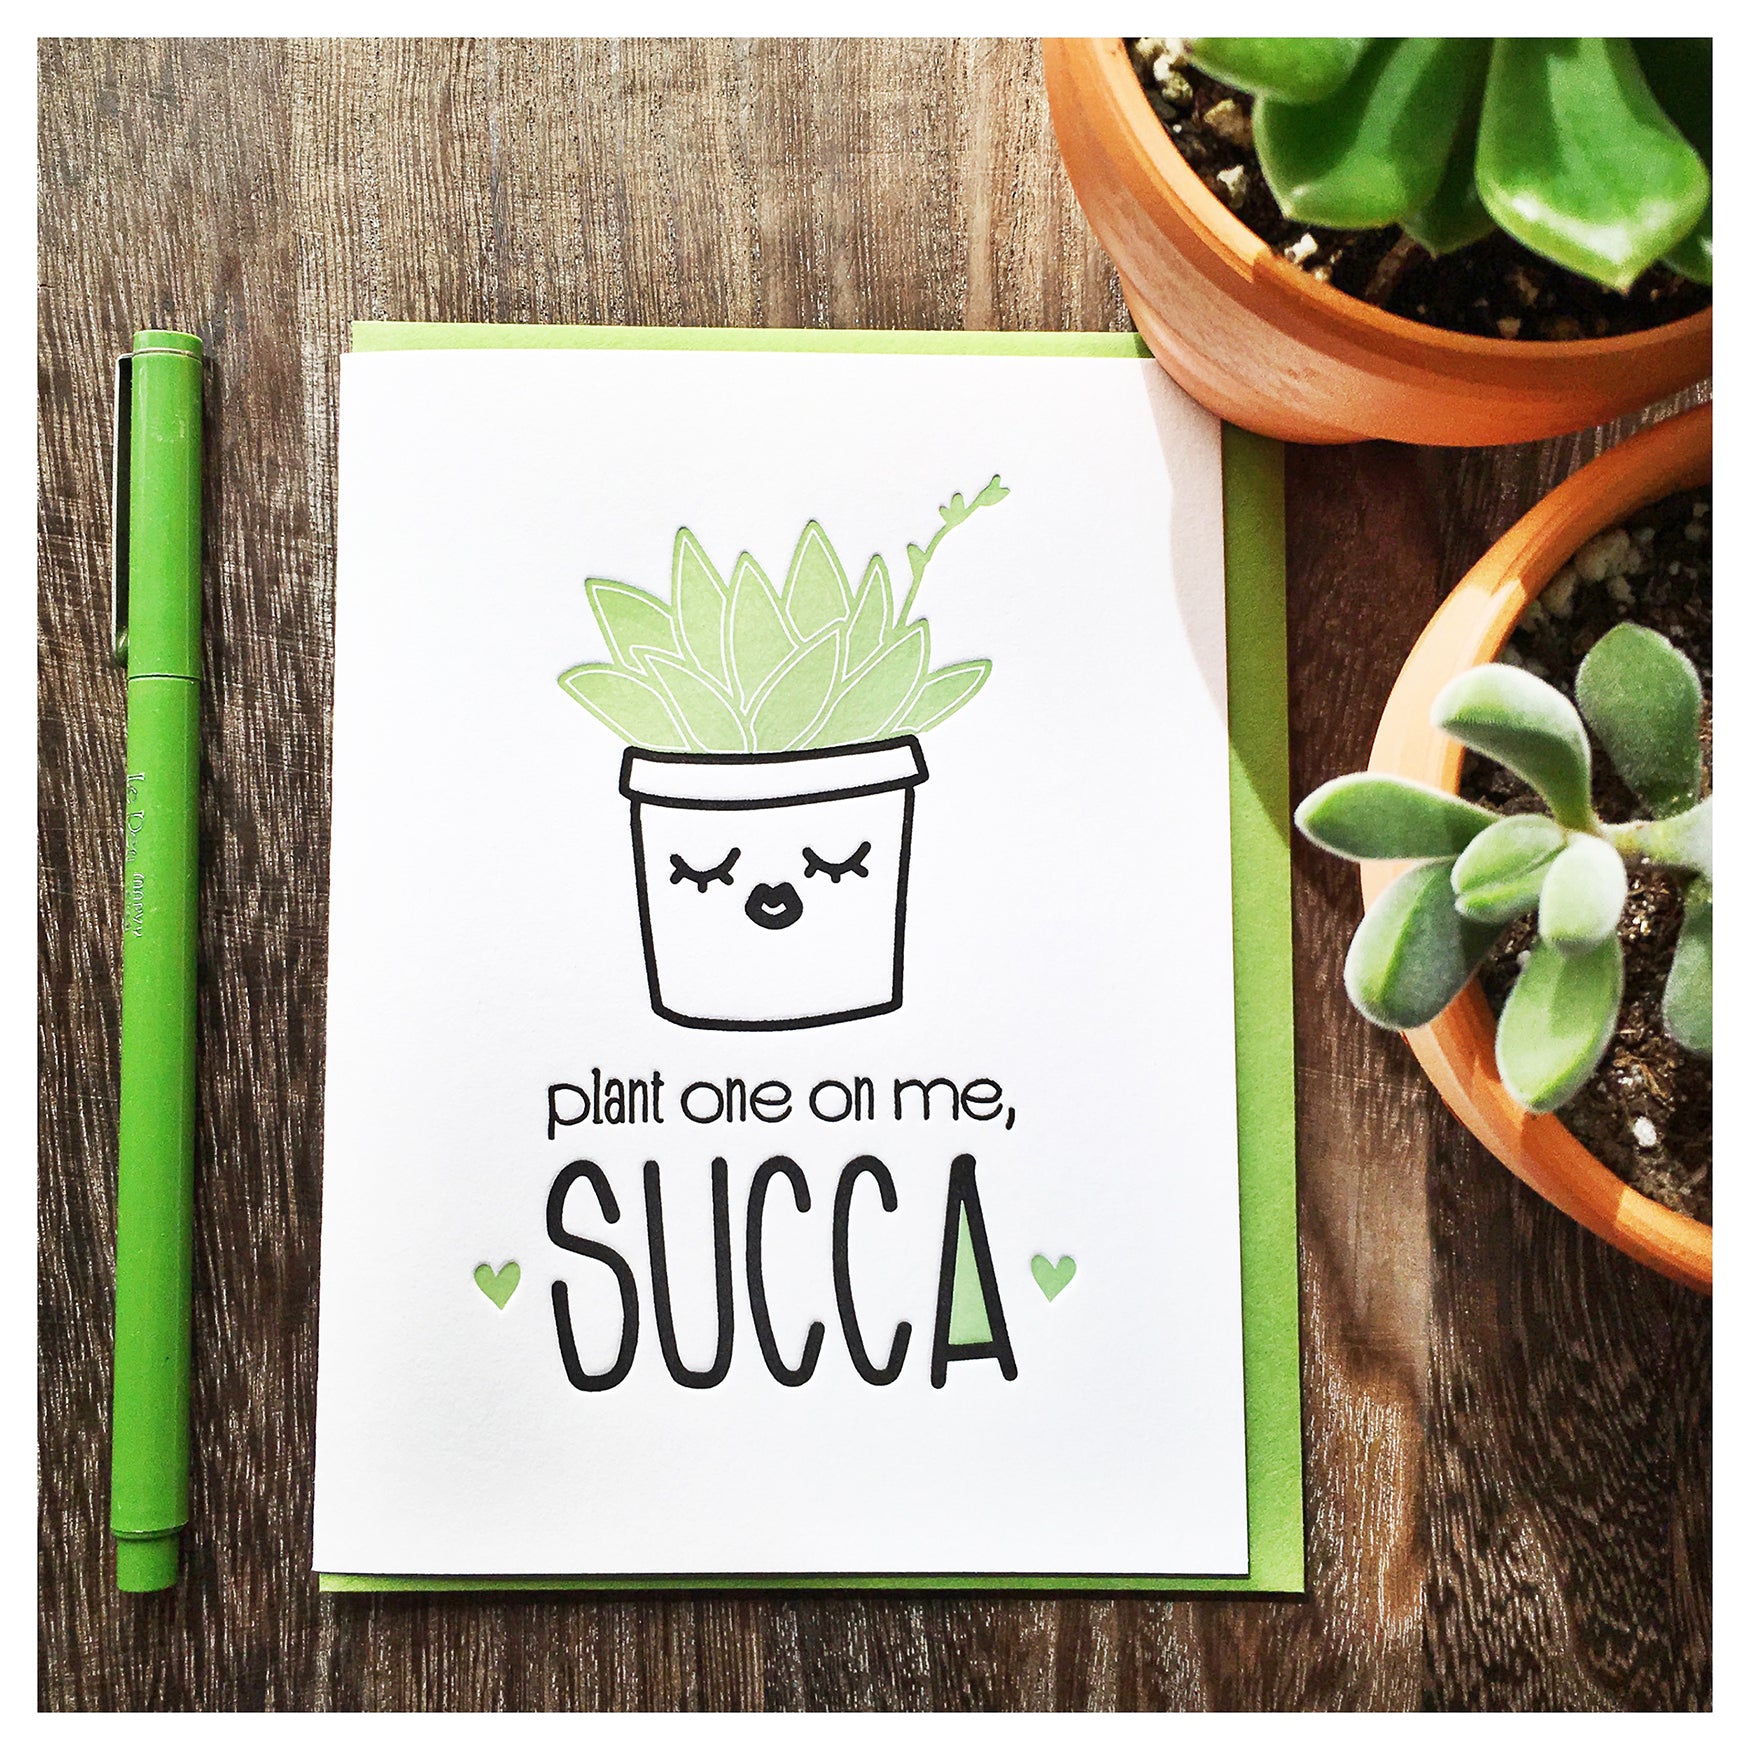 Funny Plant One on Me Succa | Kissy Succulent Love Letterpress Card | kiss and punch - Kiss and Punch